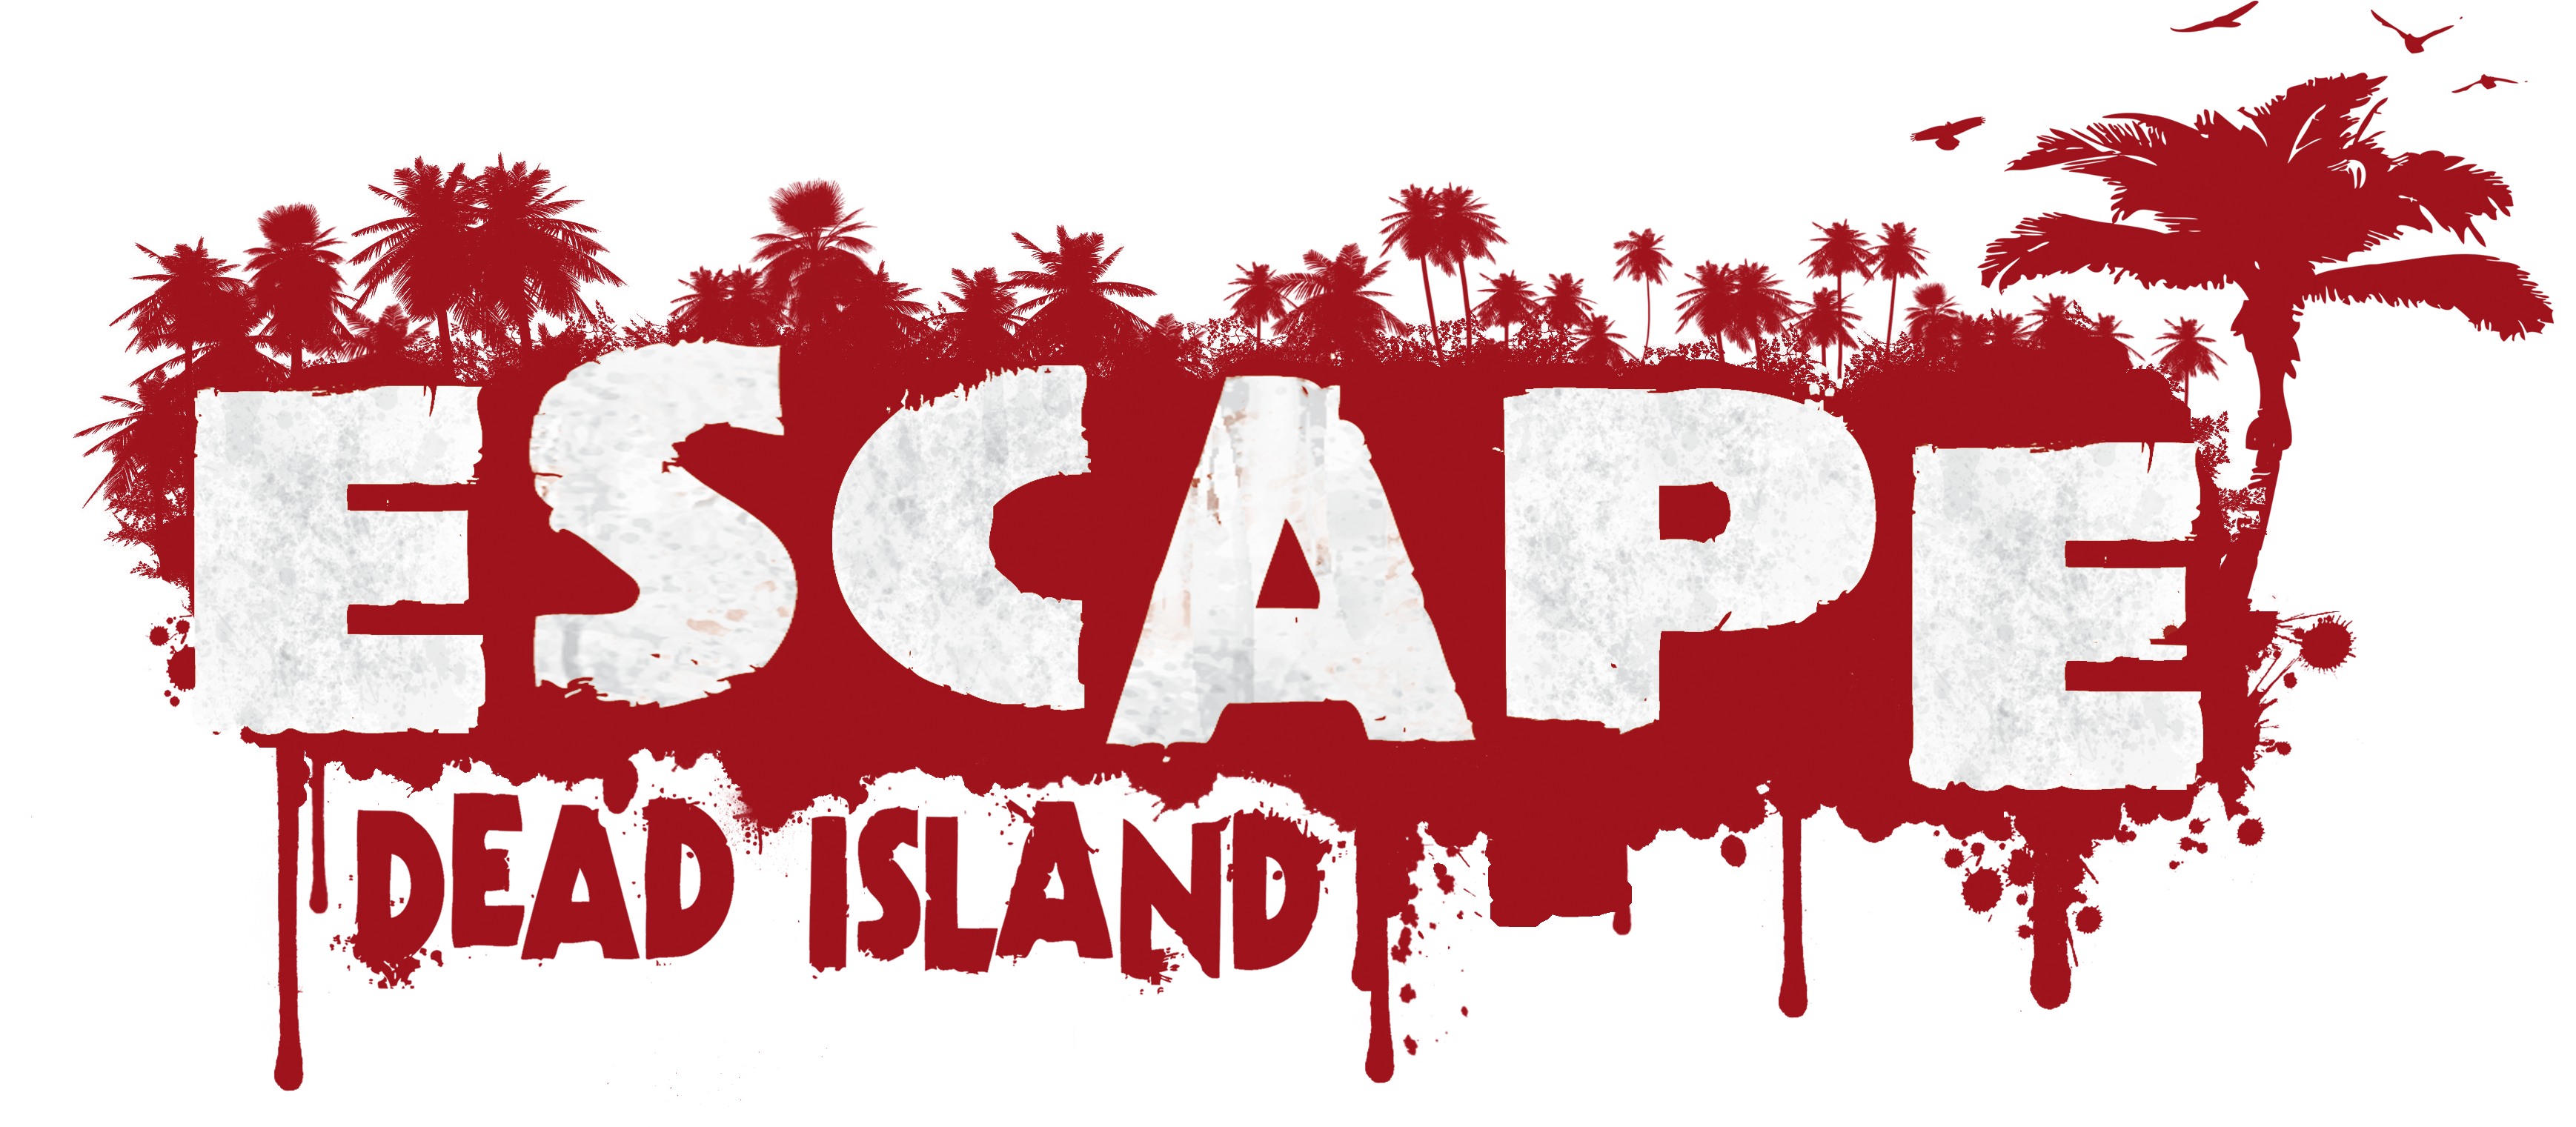 Dead Island Free PNG